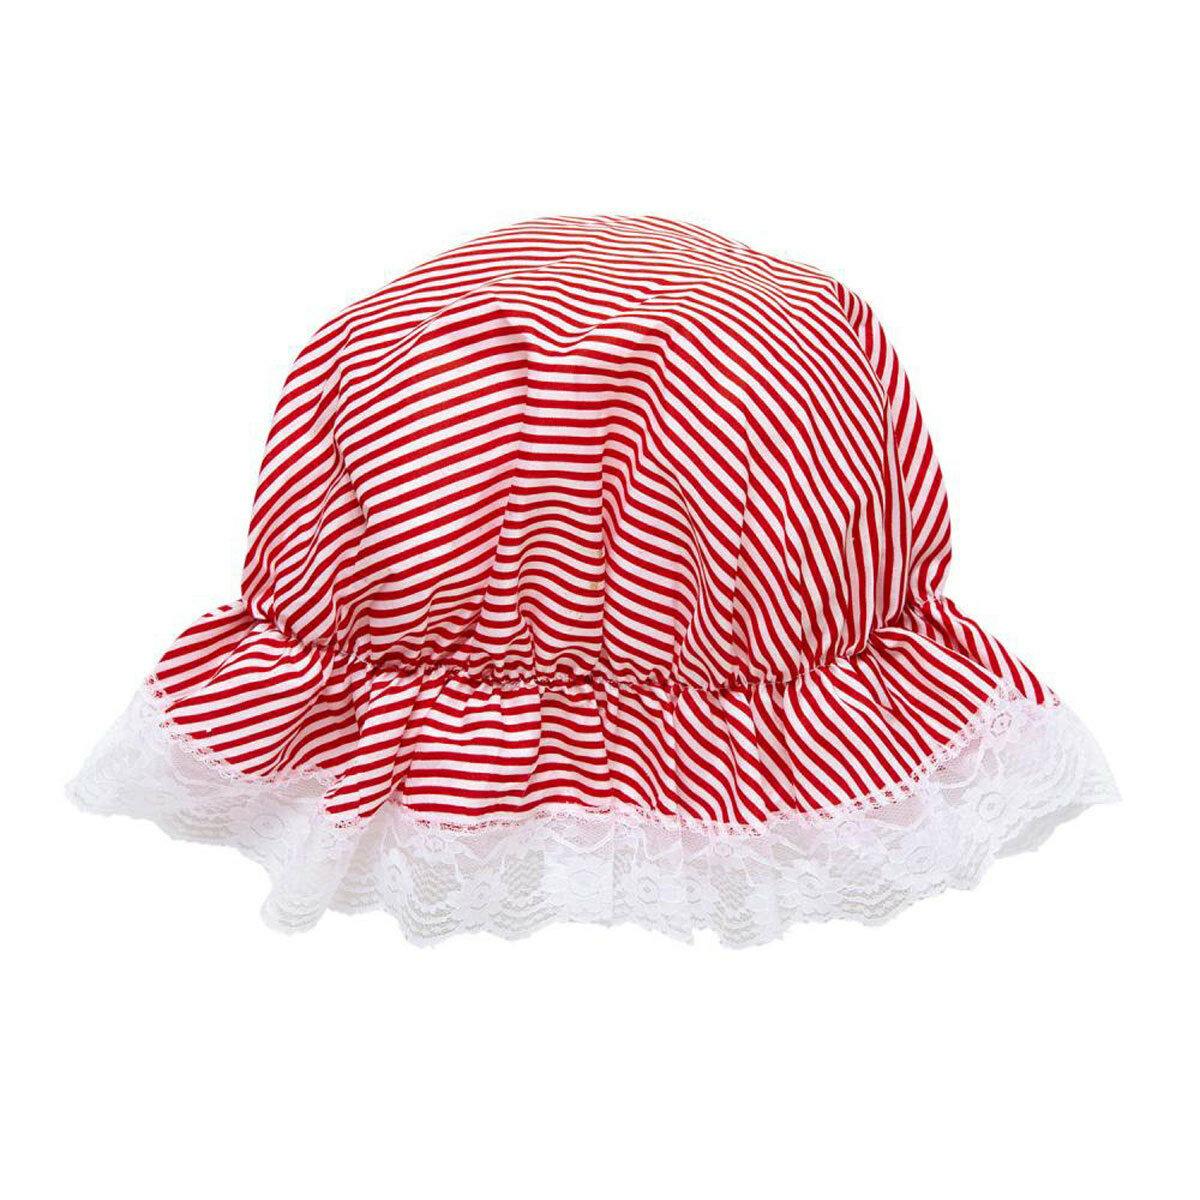 Stripped Mob Cap Bonnet with Lace Detailing Traditional Victorian Fancy Dress - Labreeze